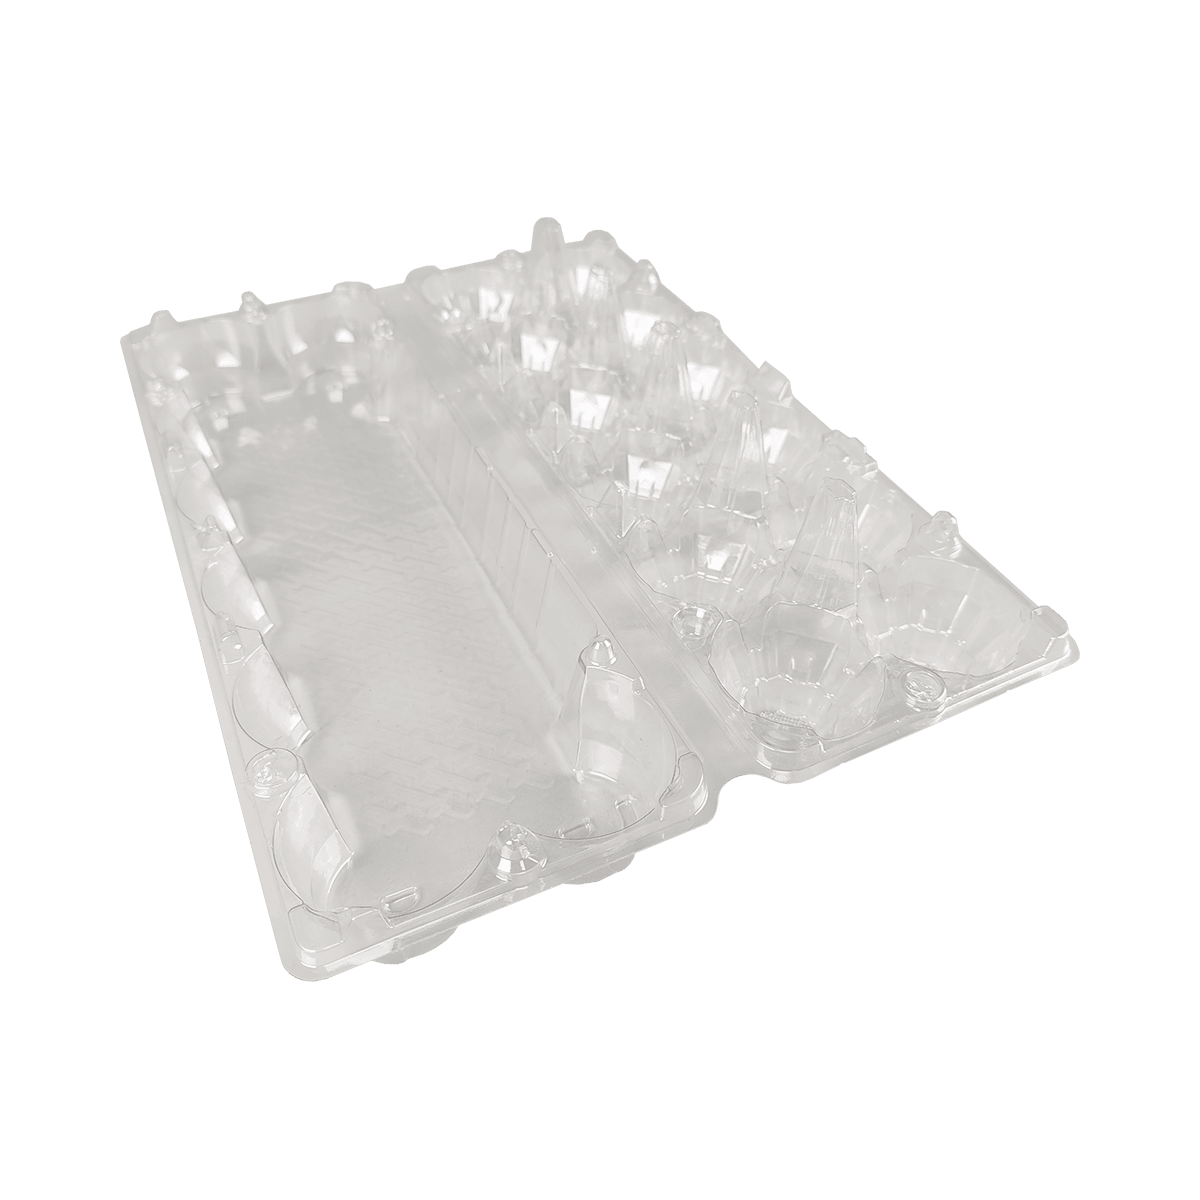 Safe and convenient PET Transparent 12 egg cartons for family-friendly ranching